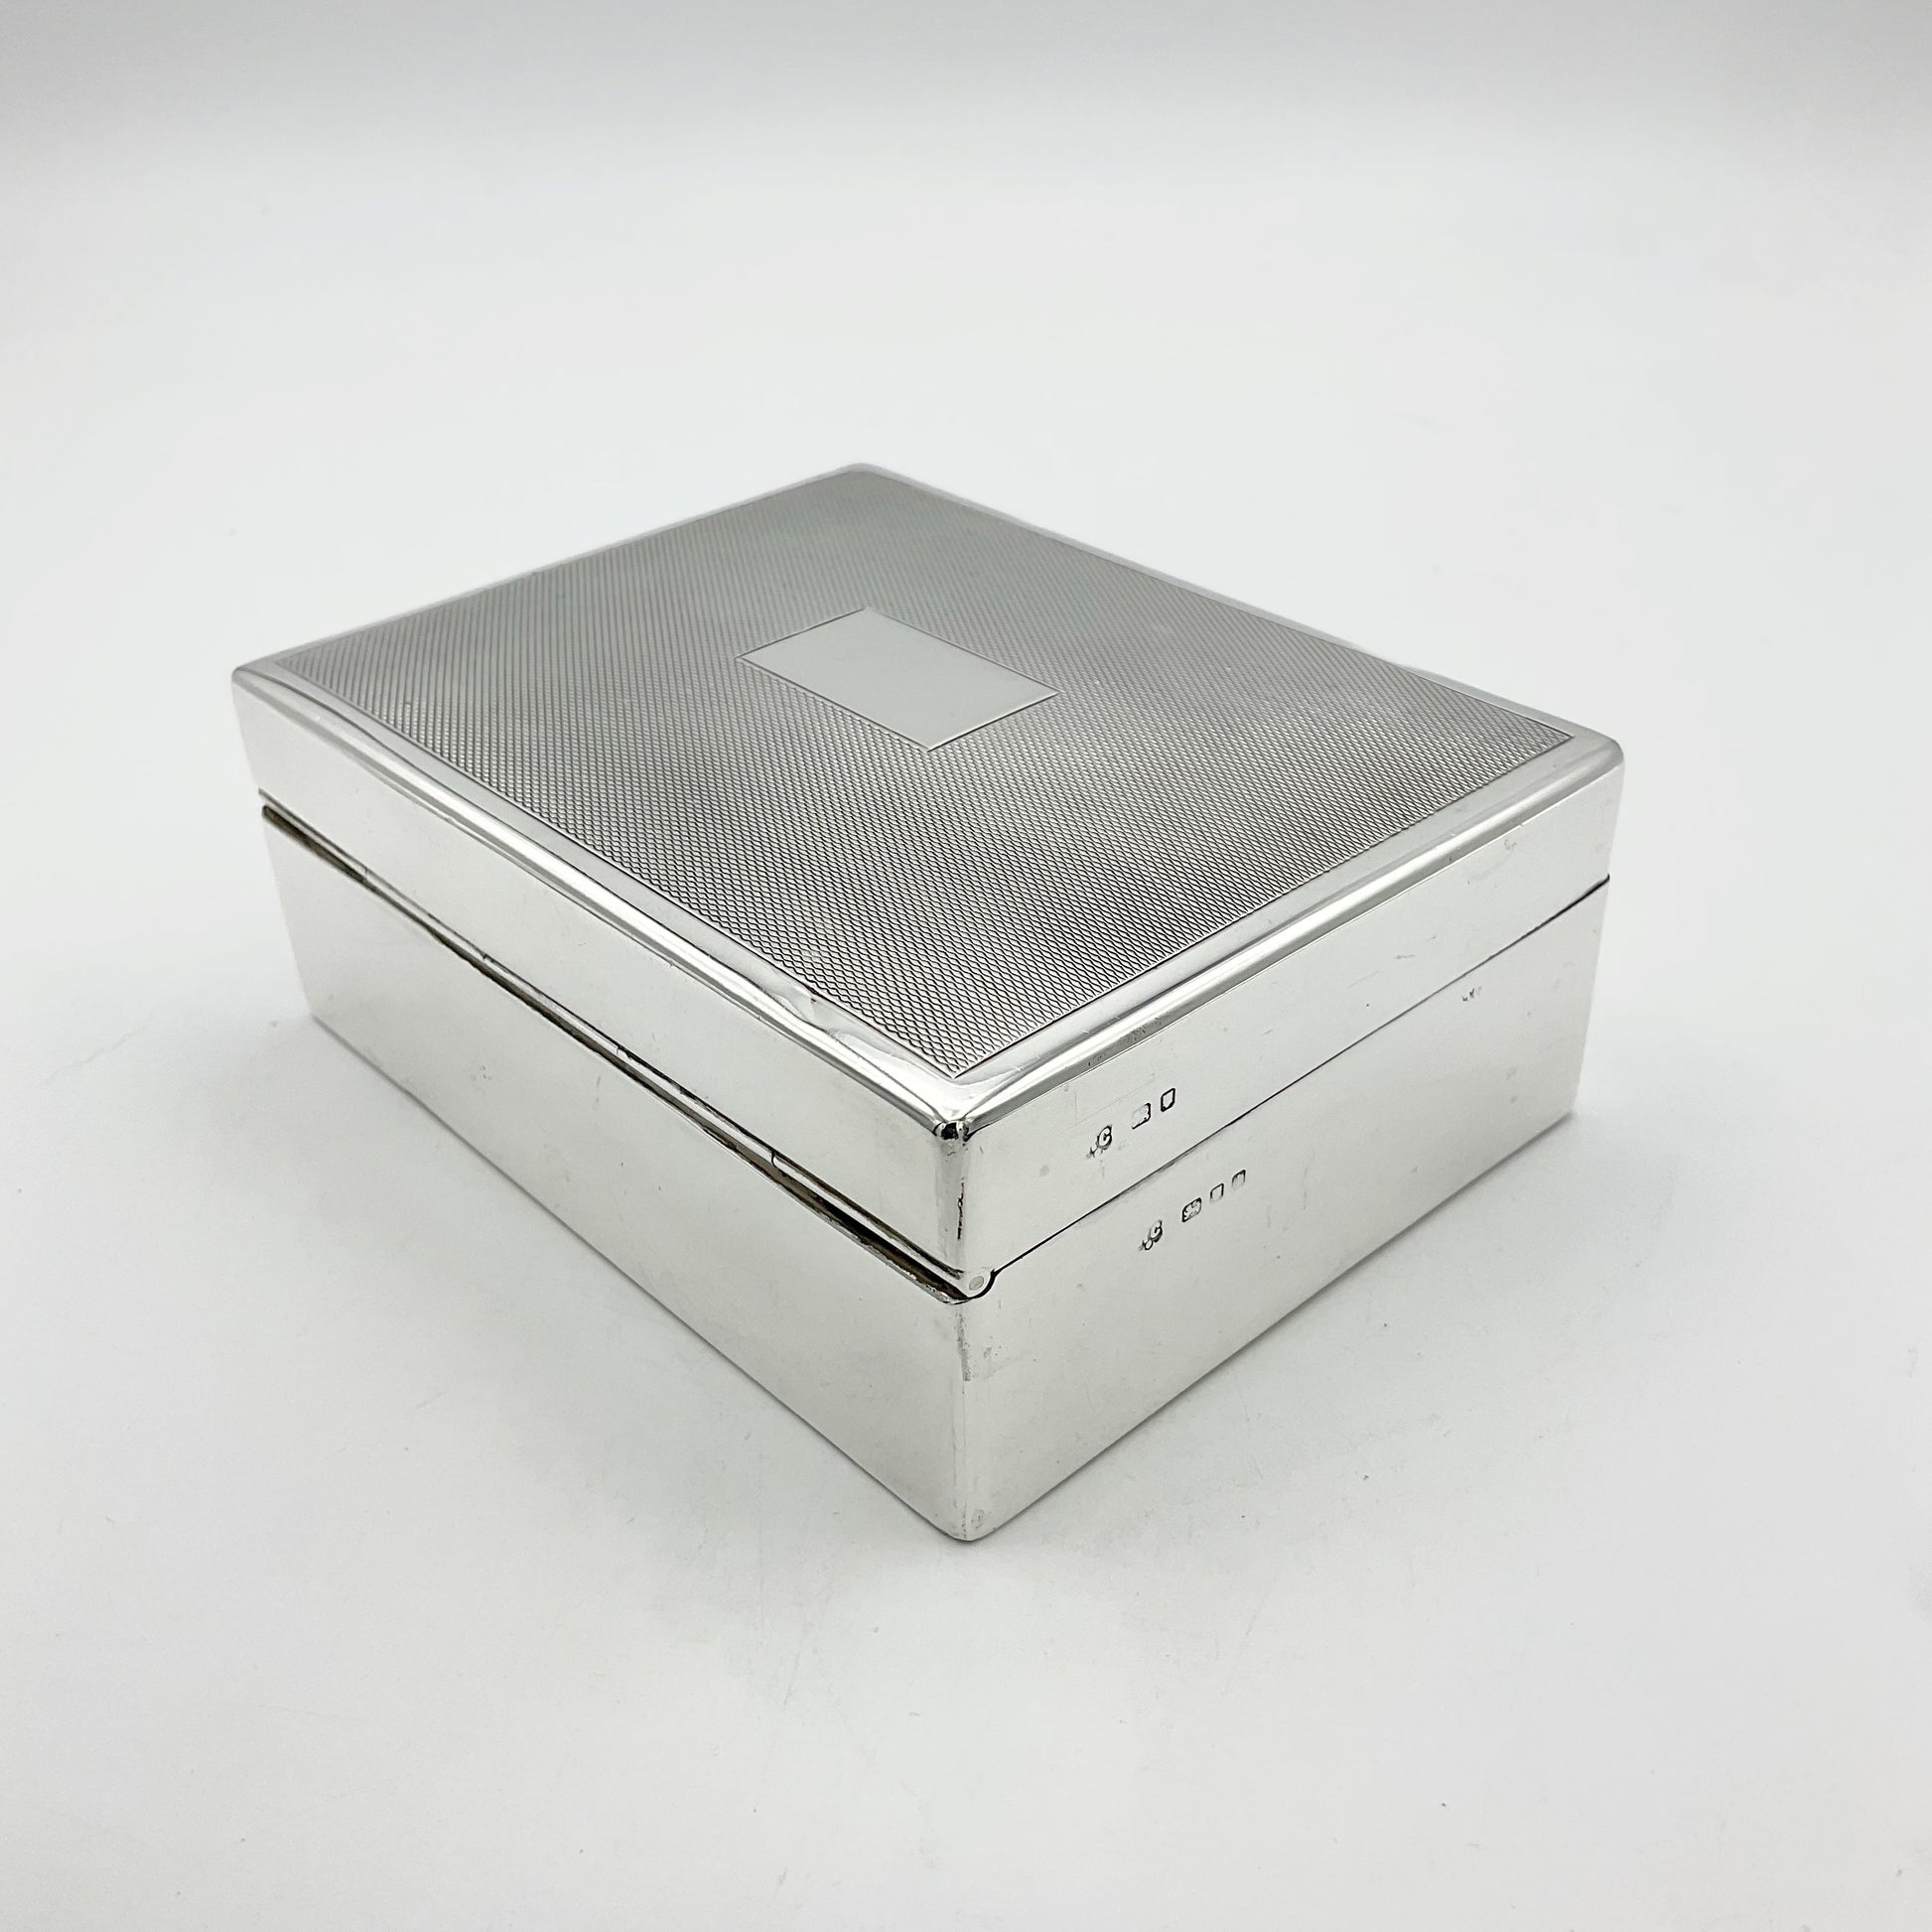 Silver cigarette box with the view of the back hinge and hallmarks at the side